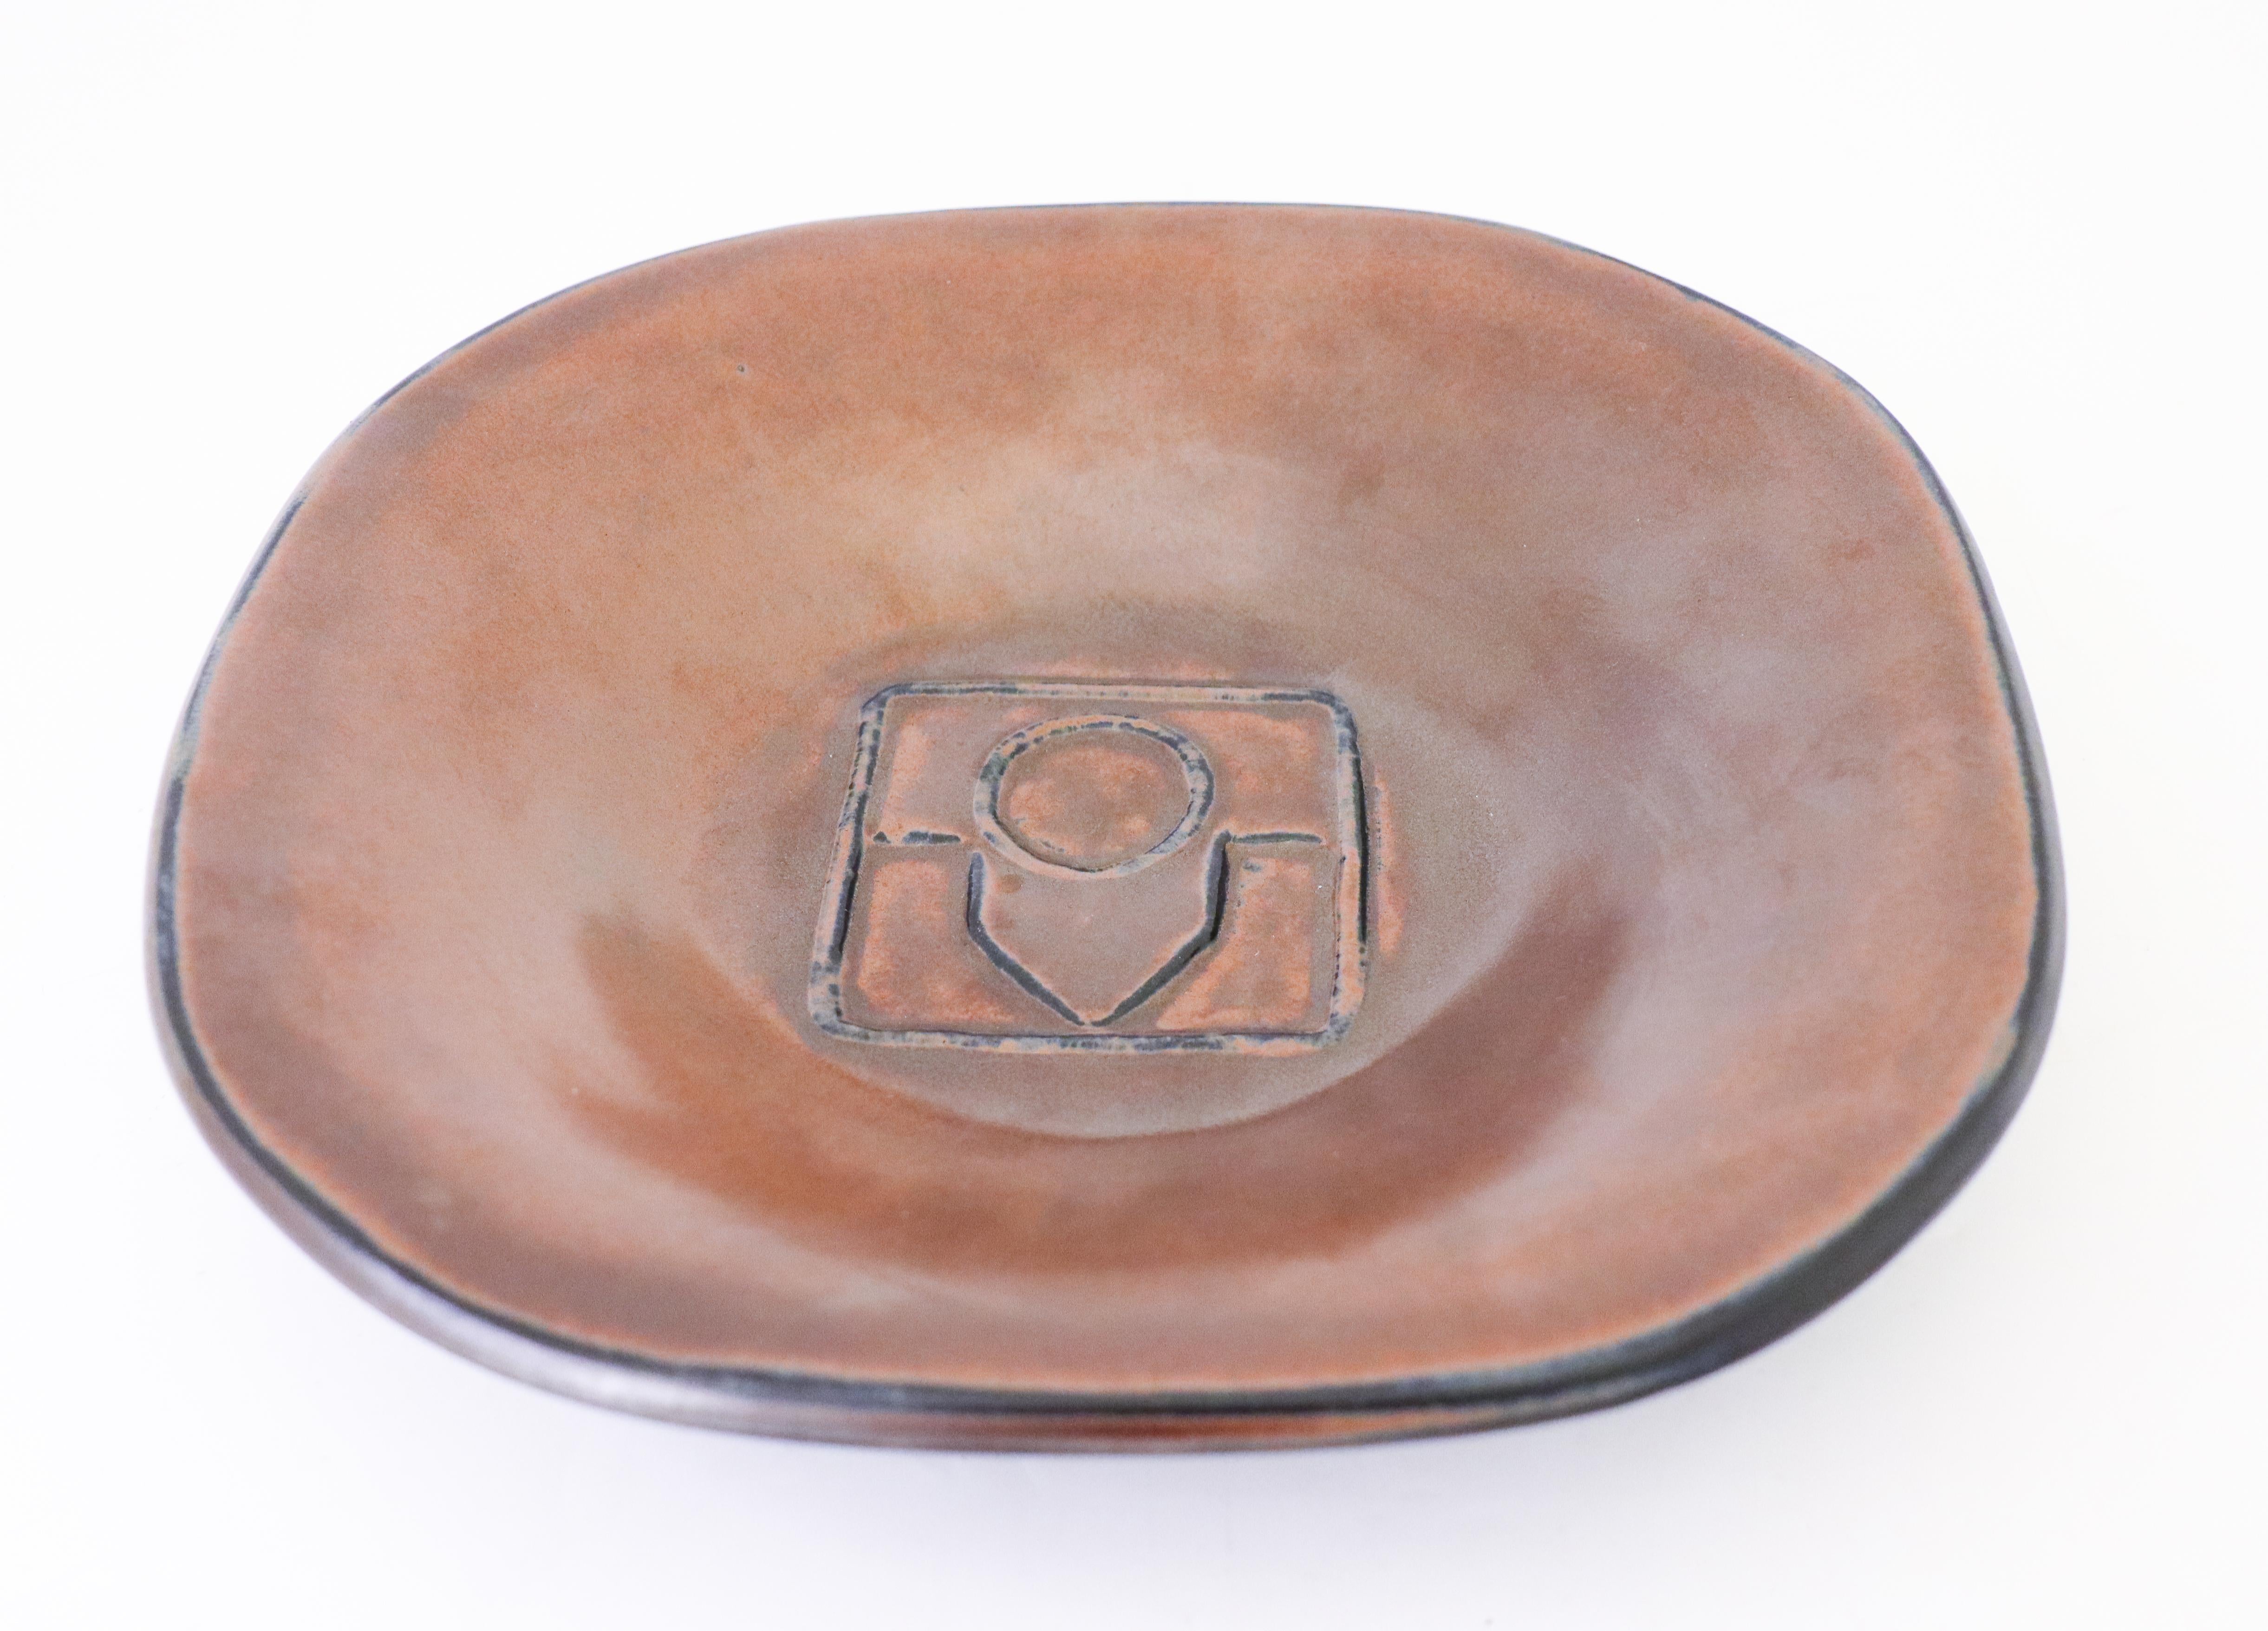 A unique squared brown bowl designed by Gunnar Nylund at Rörstrand, the bowl is 26 x 26 cm (10.4